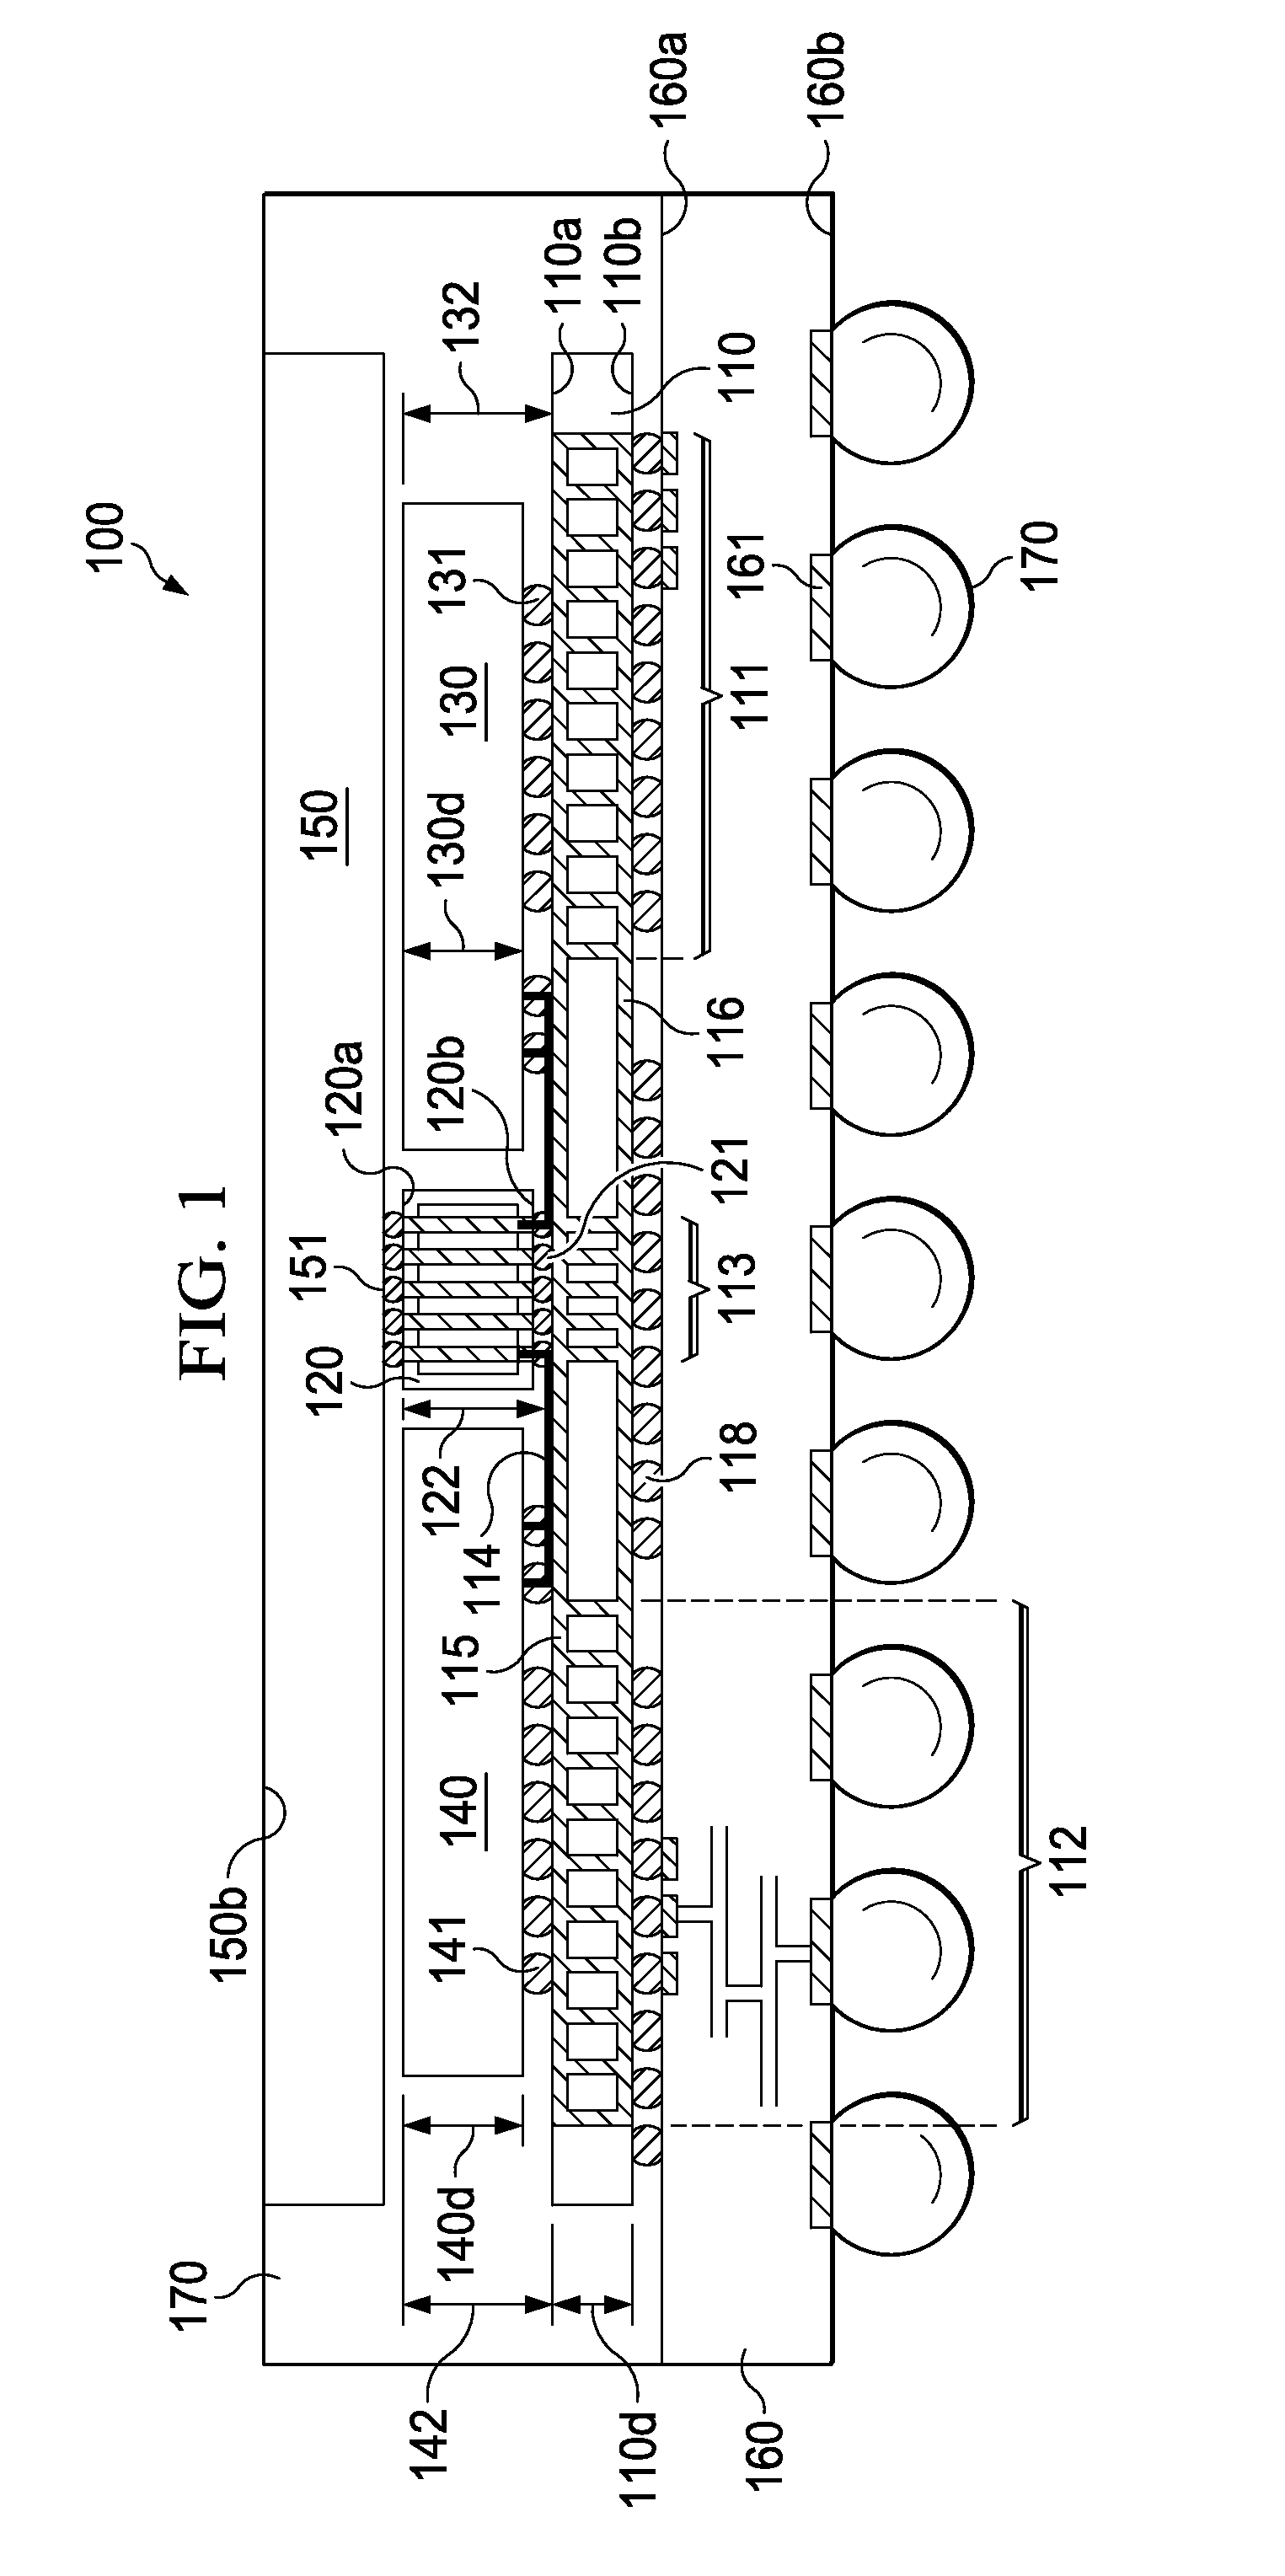 3D Semiconductor Interposer for Heterogeneous Integration of Standard Memory and Split-Architecture Processor